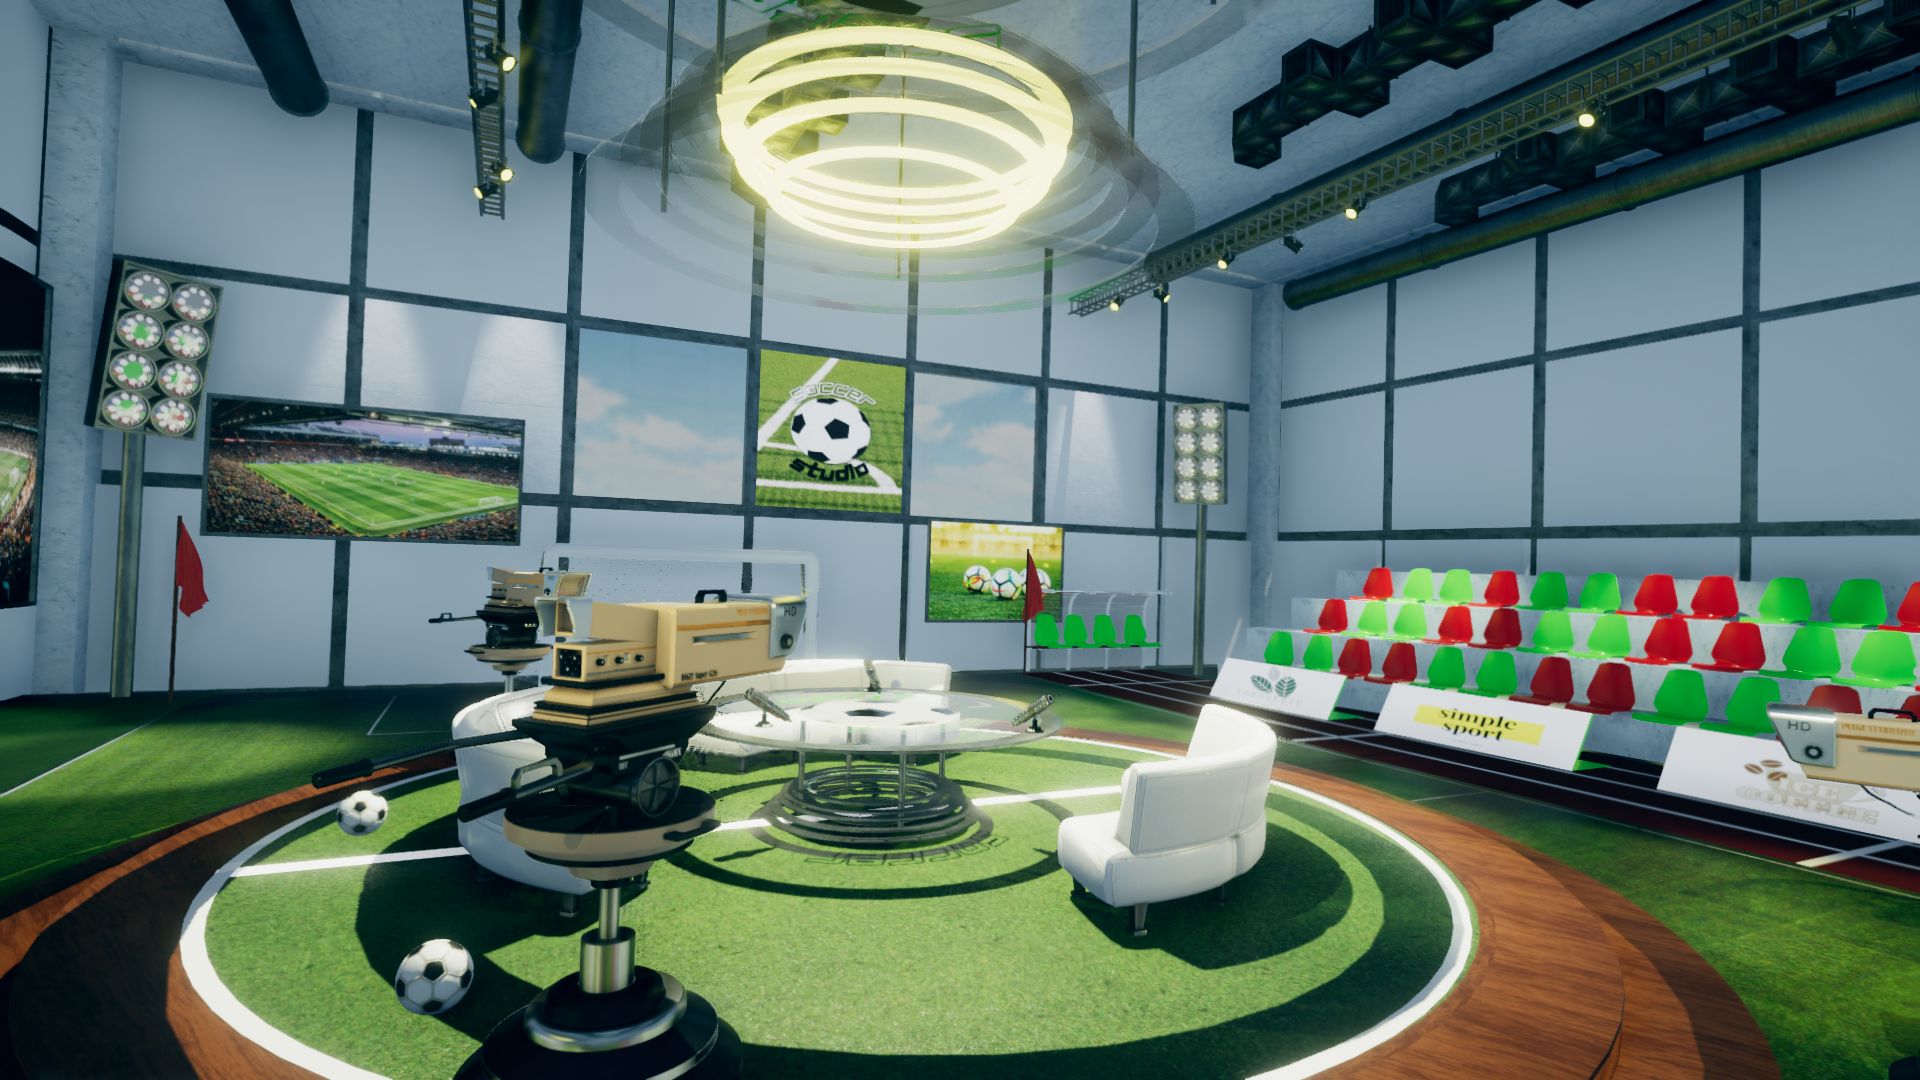 An image showing Soccer Studio Set asset pack, created with Unity Engine.